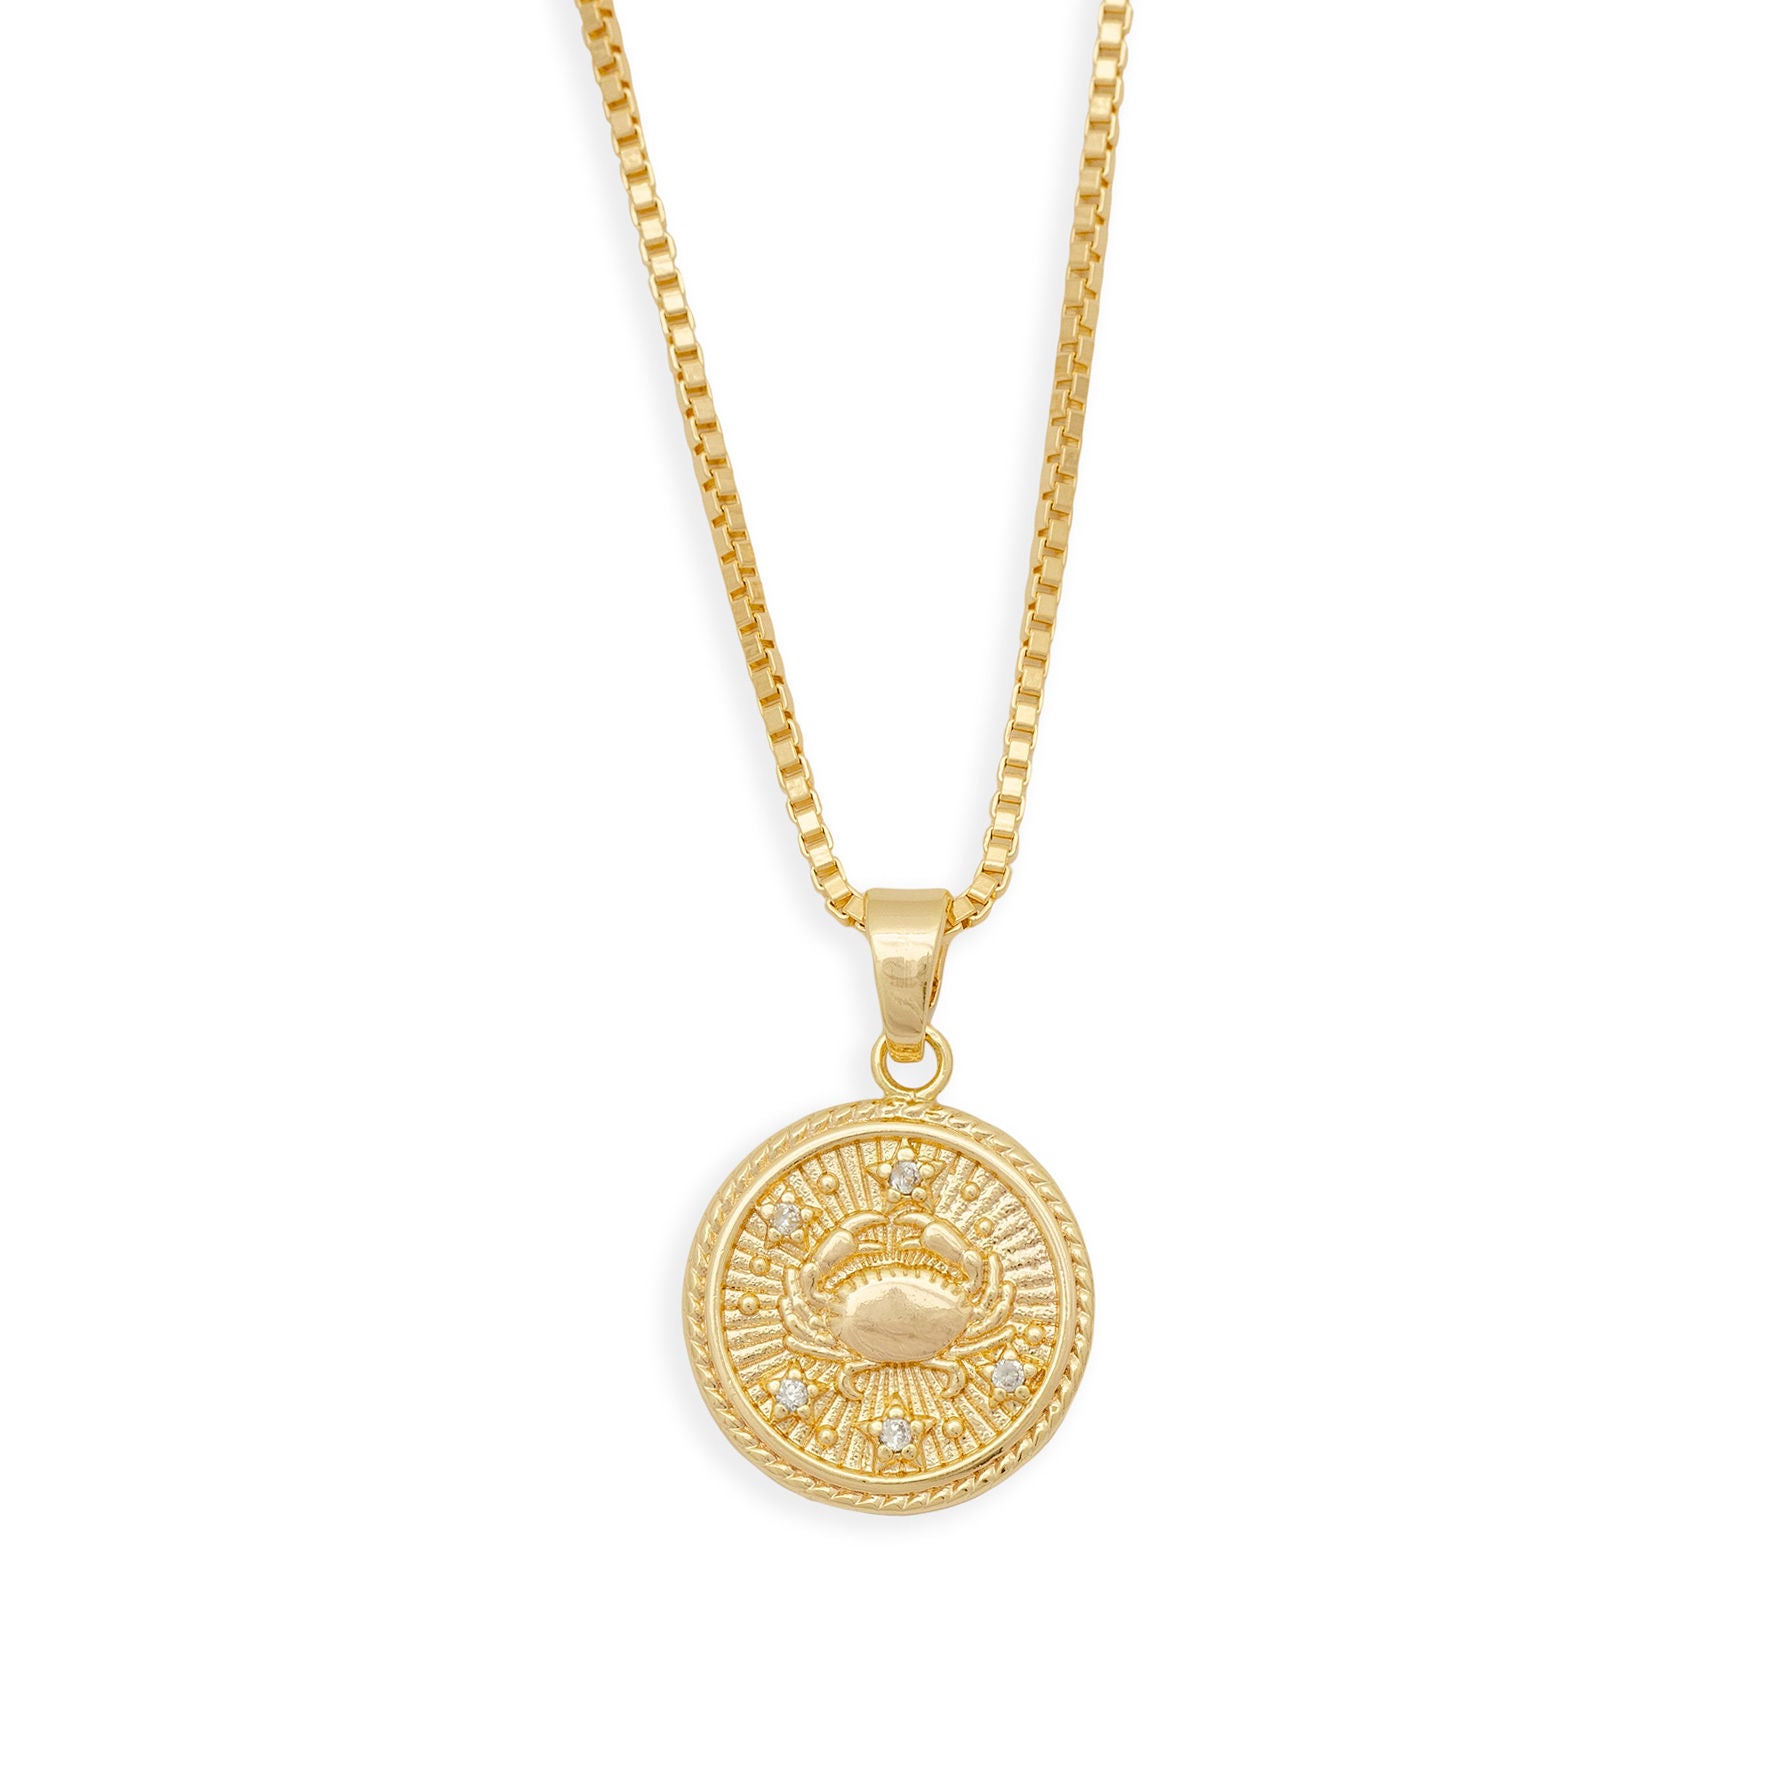 In the Stars Zodiac Necklace - Cancer from Erin Fader Jewelry